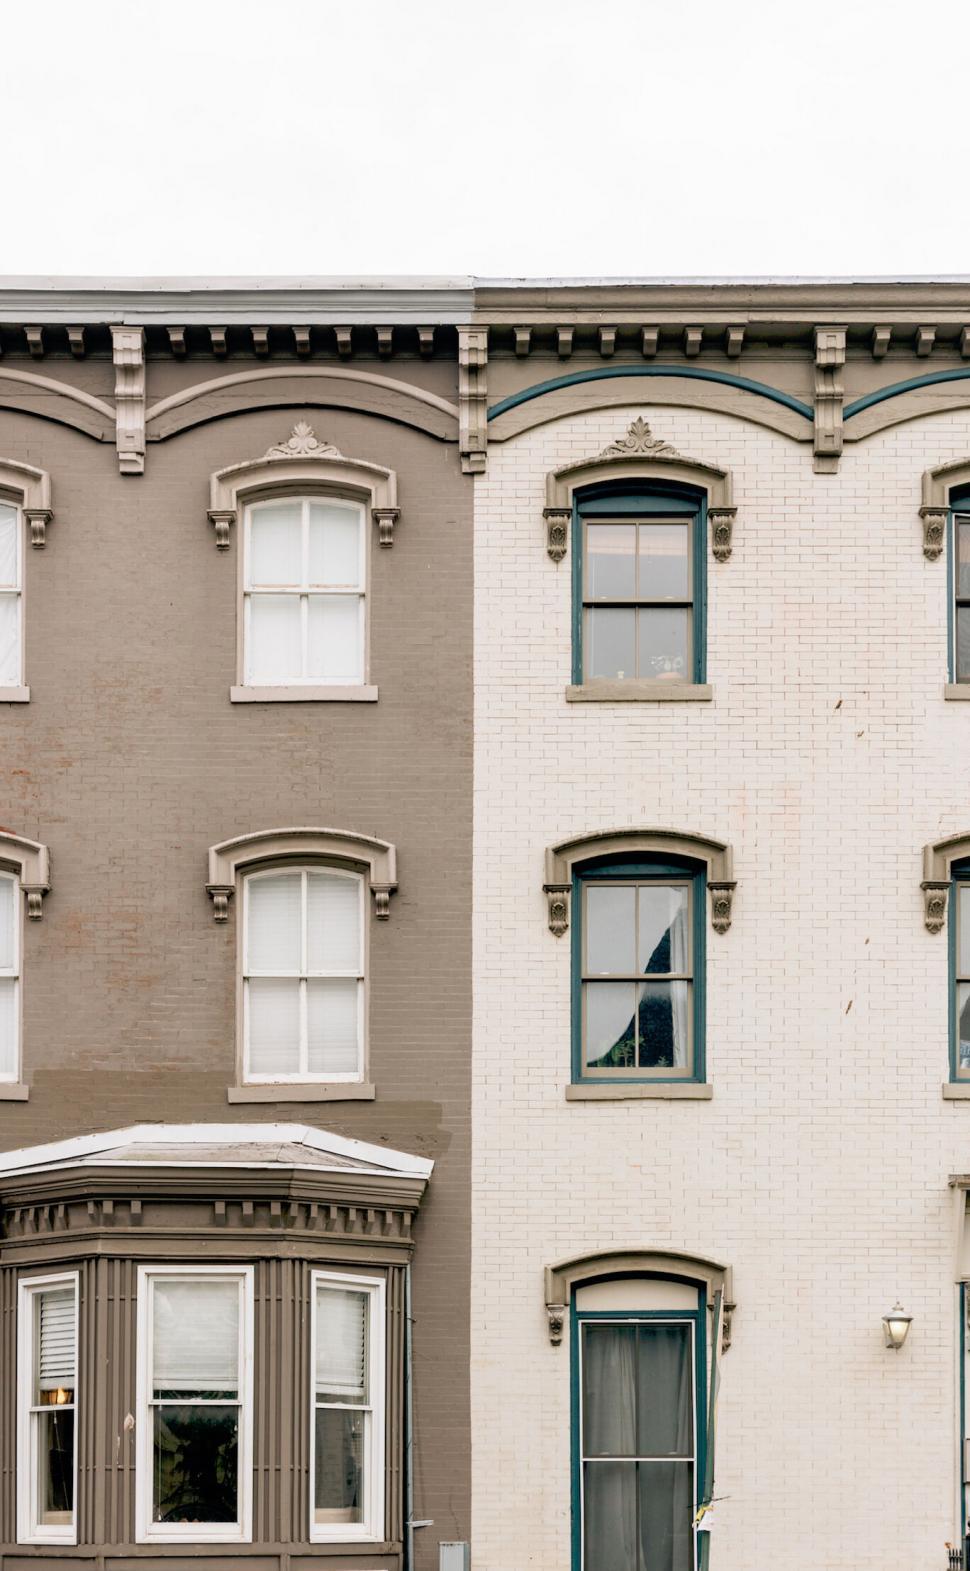 Free Image of Victorian style buildings with ornate windows 